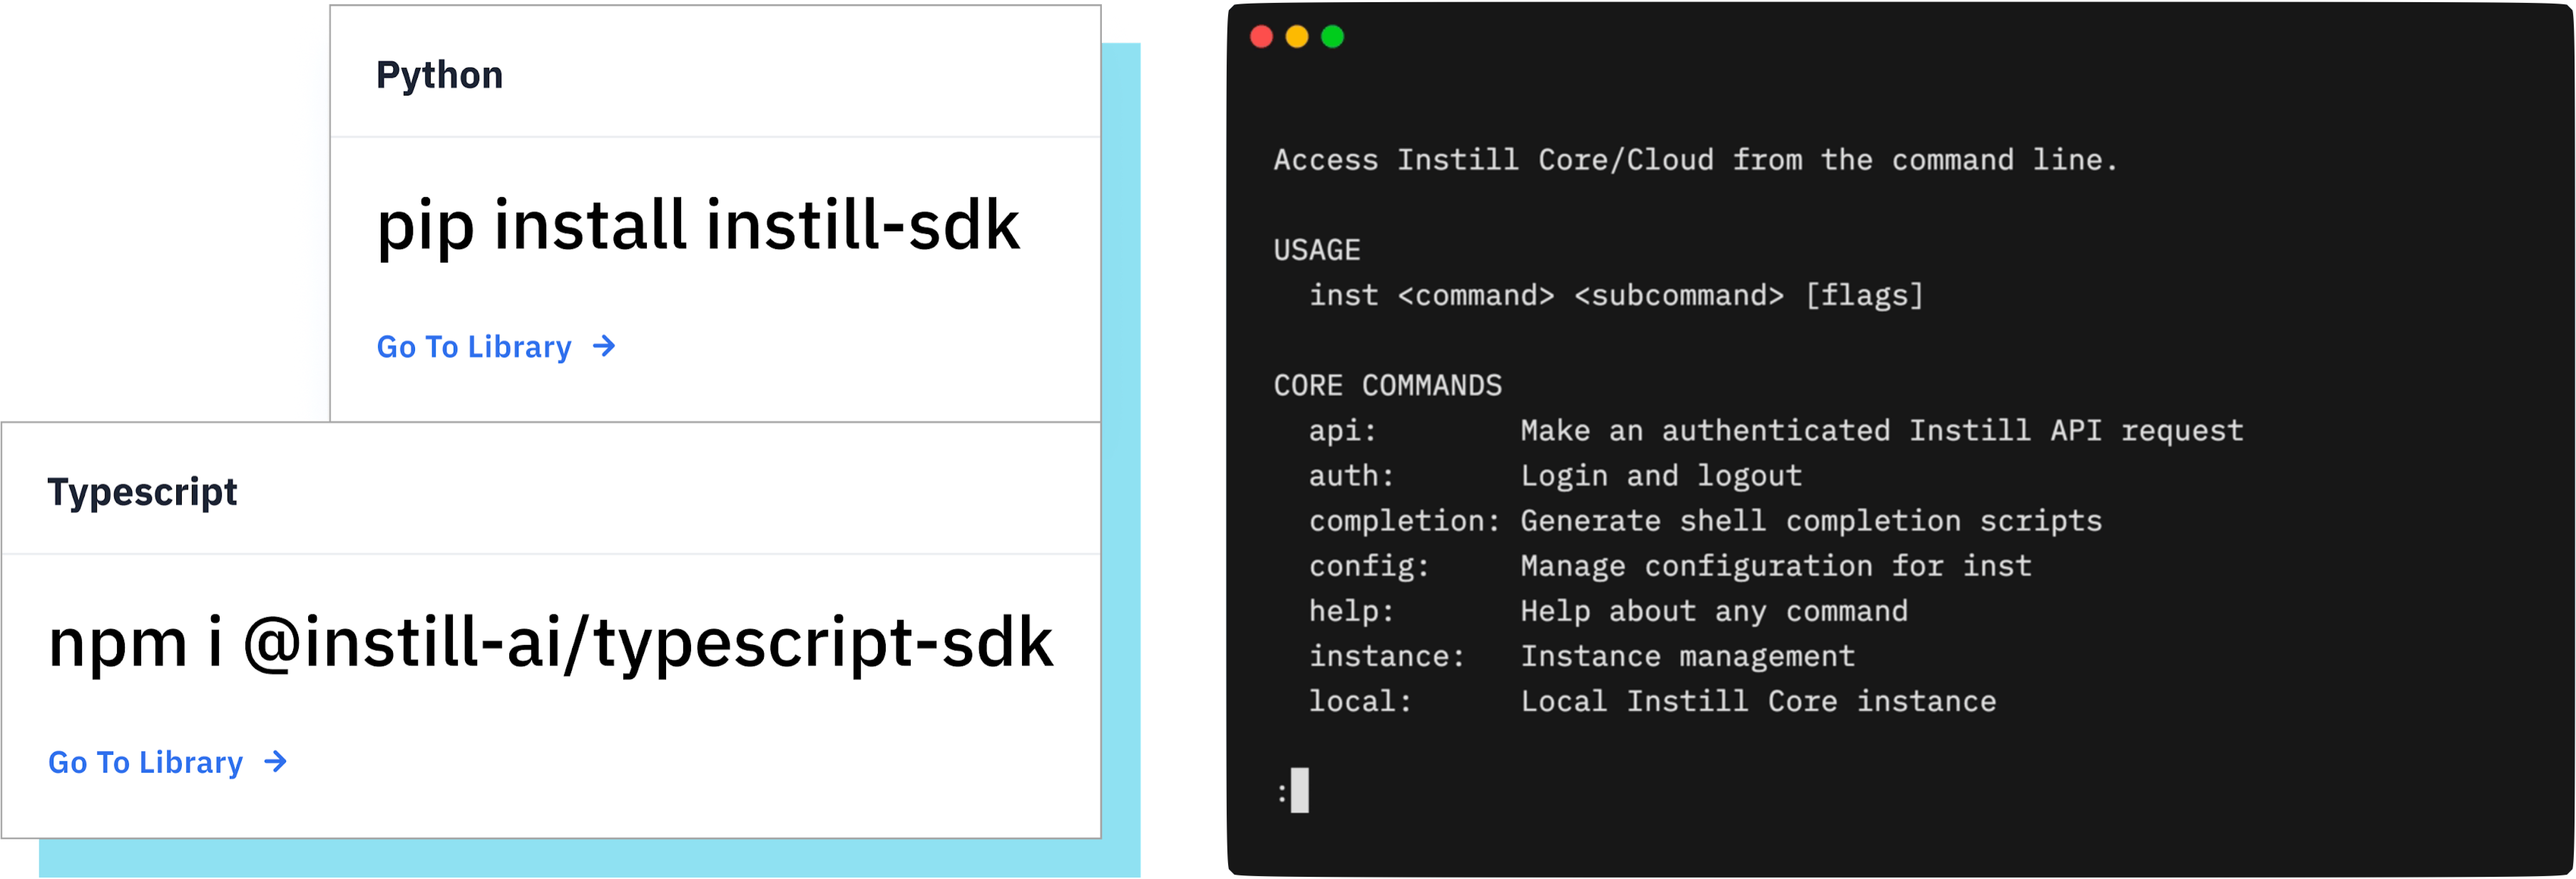 Integrate Instill VDP with your language of choice and access it via CLI.